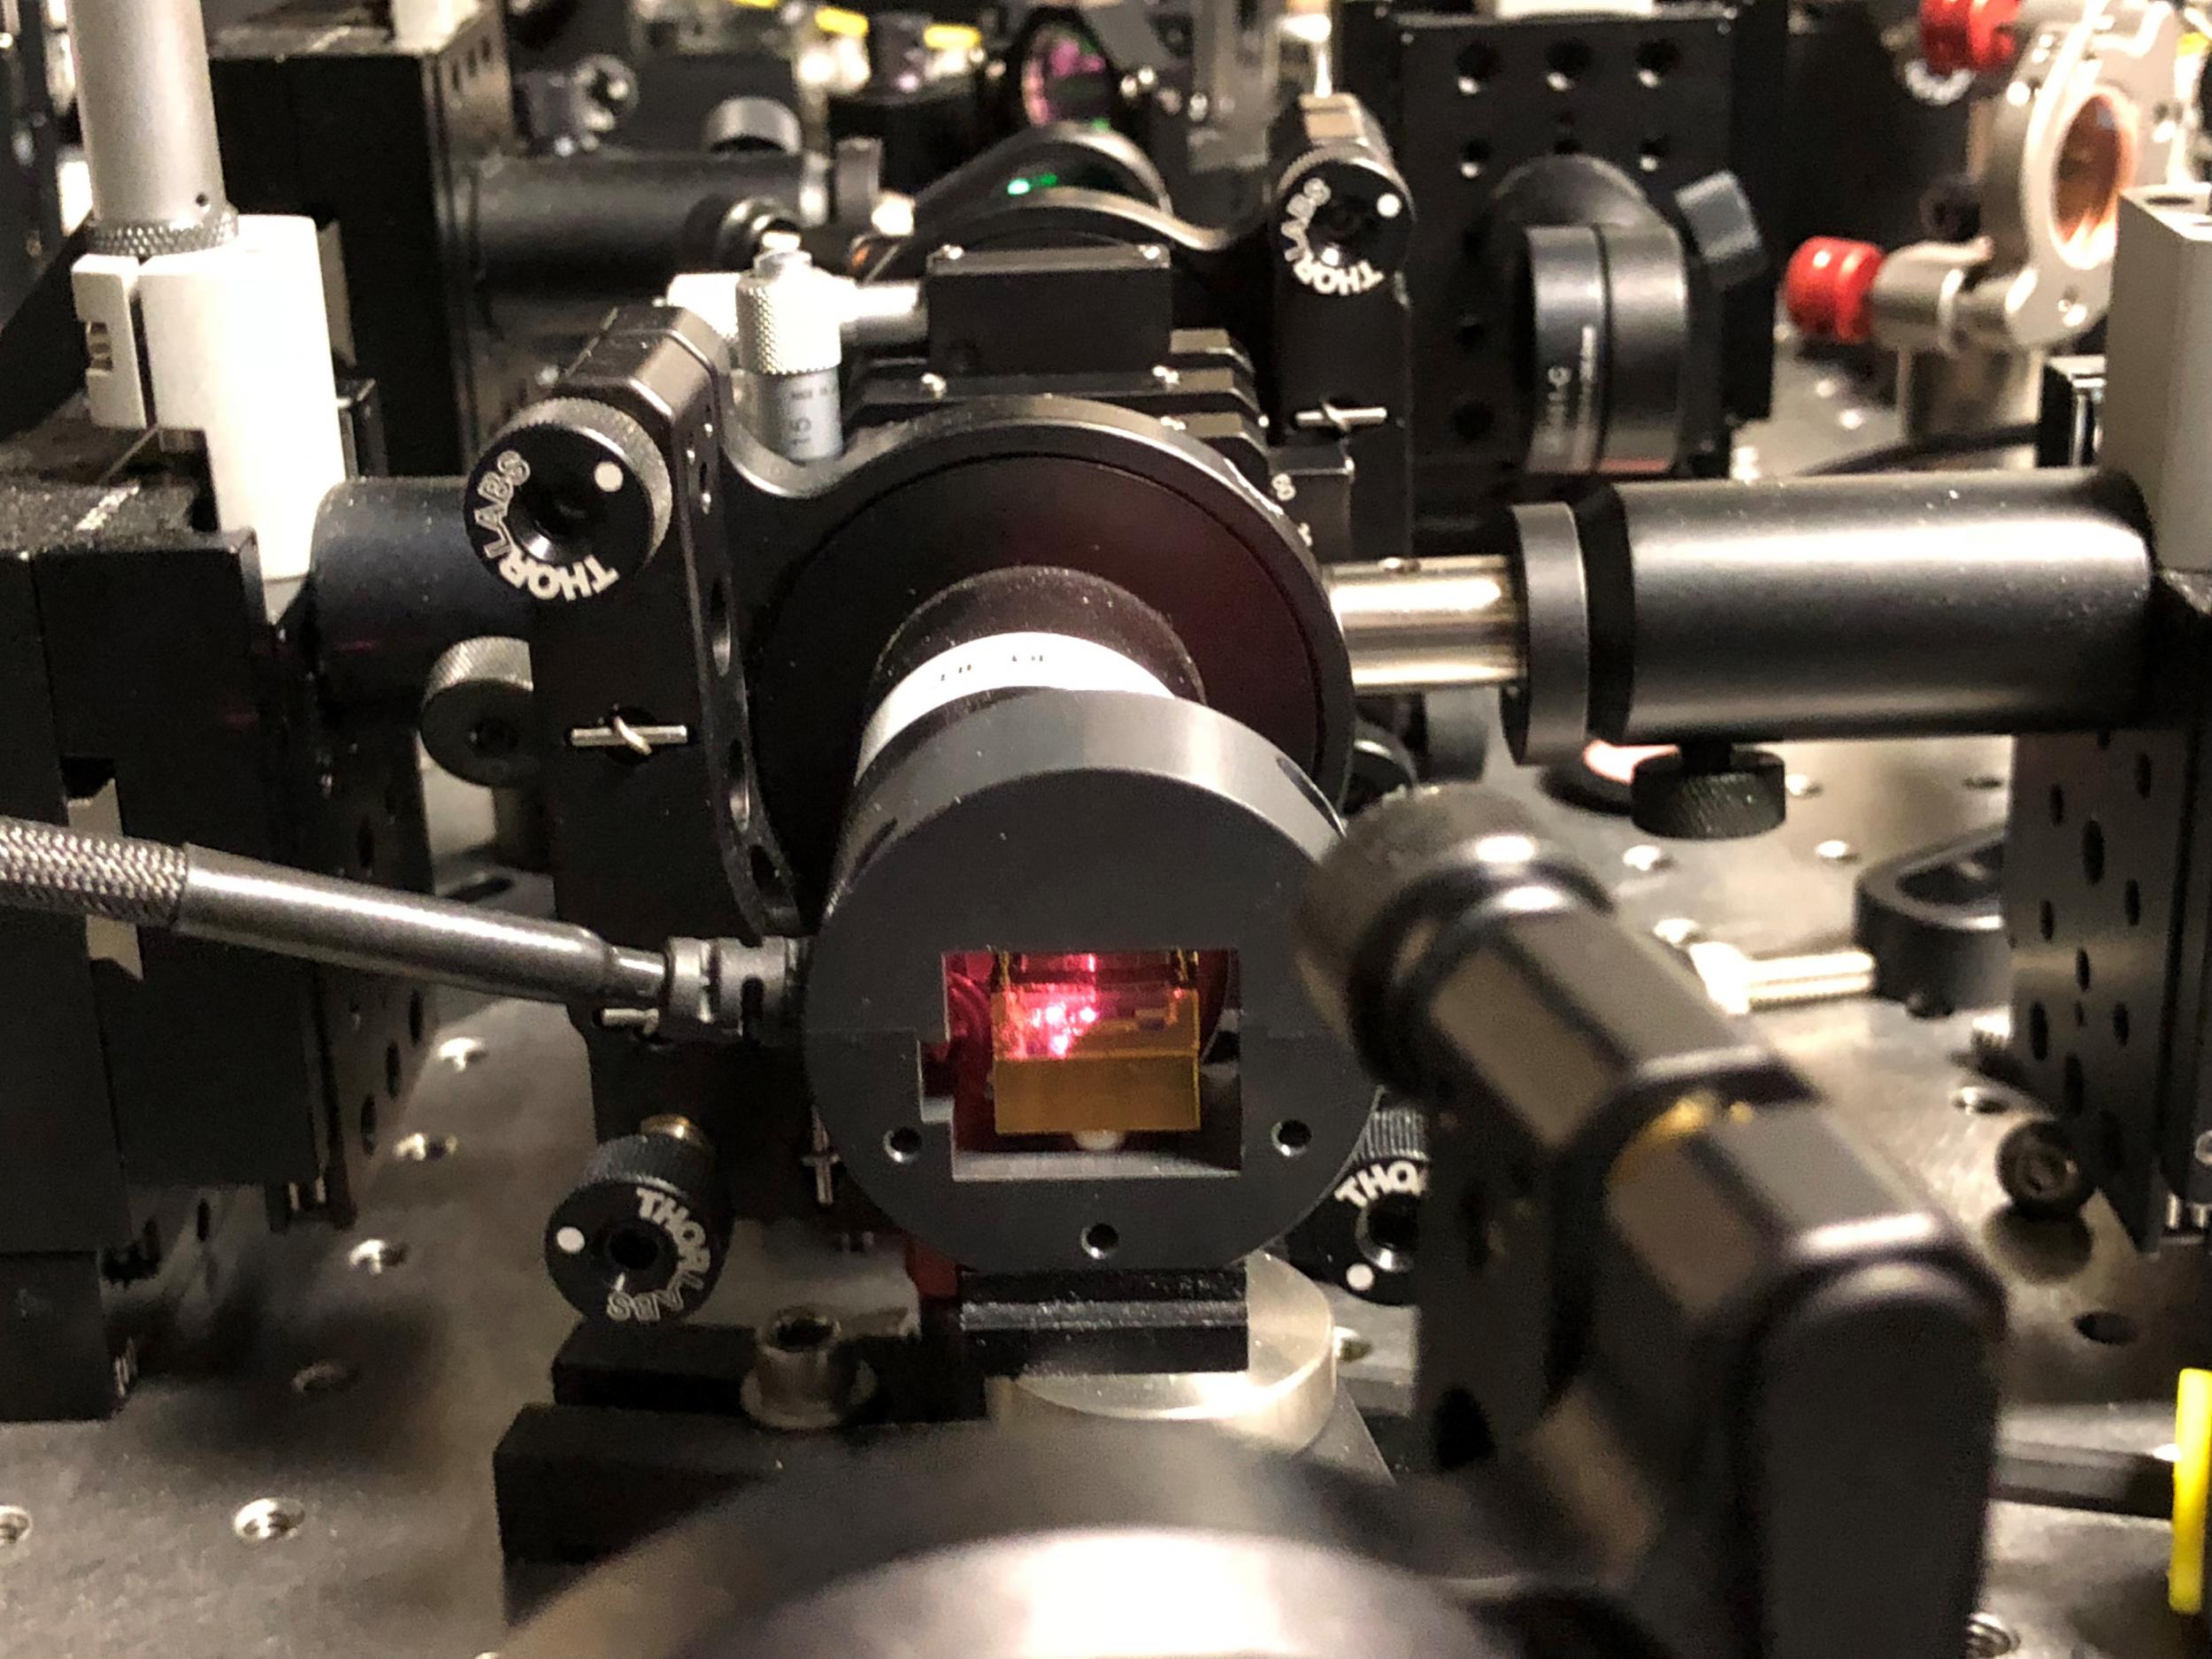 Researchers have developed a method that uses a laser to generate numbers guaranteed to be random by quantum mechanics